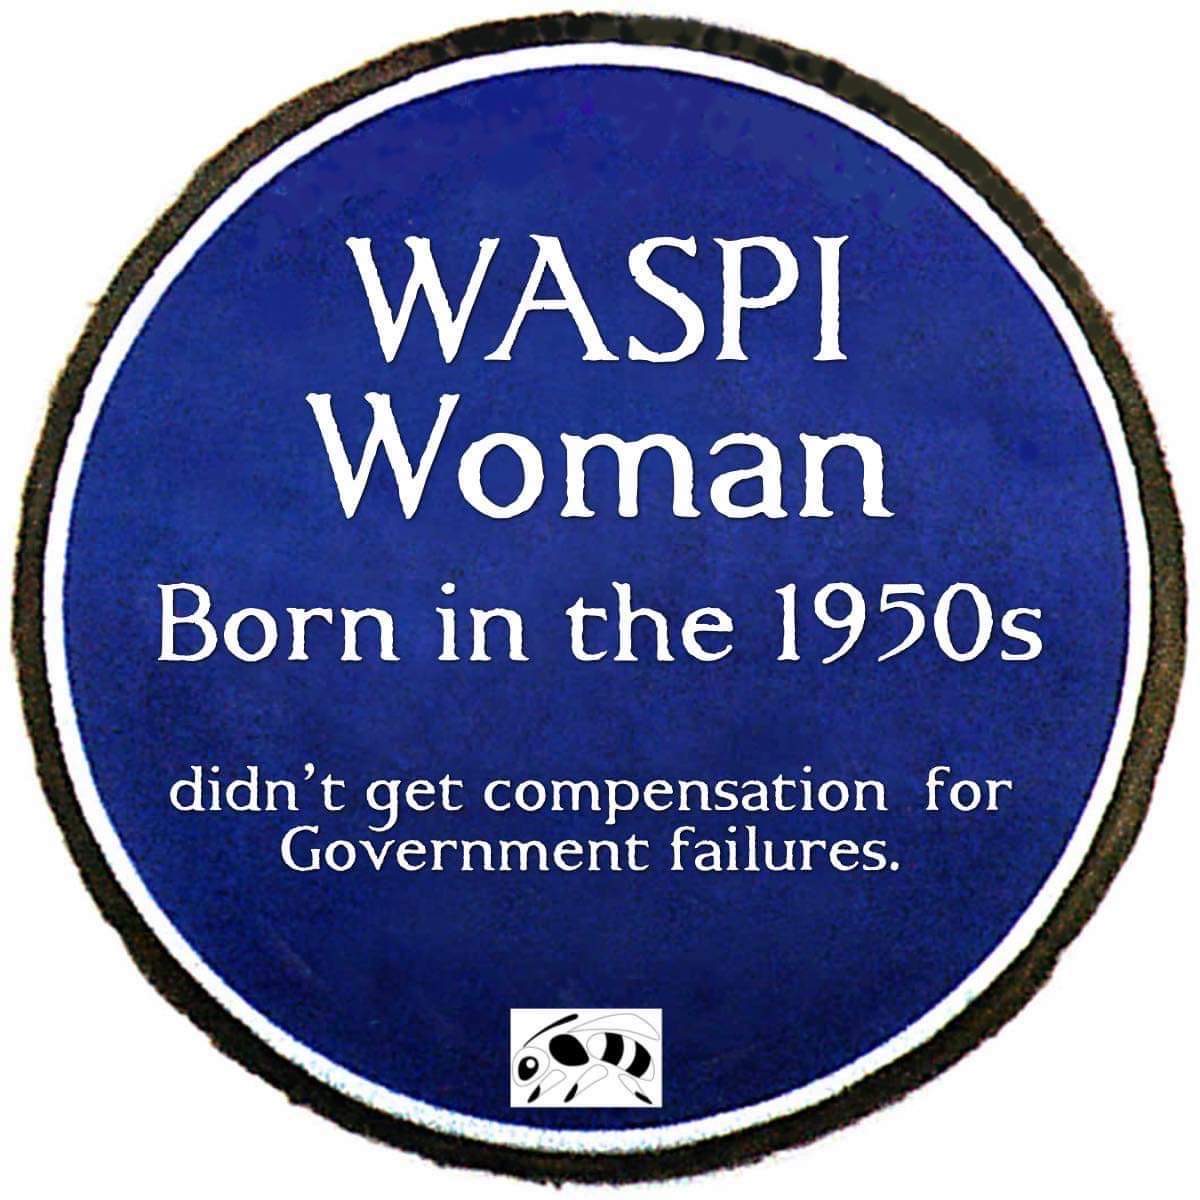 250,000 #WASPI women have now died waiting for compensation for lack of notice of State Pension age increases. The Government knew they had failed to inform and the #PHSO have found maladministration by the DWP. It's time to act to right this wrong for 3.6 million women.